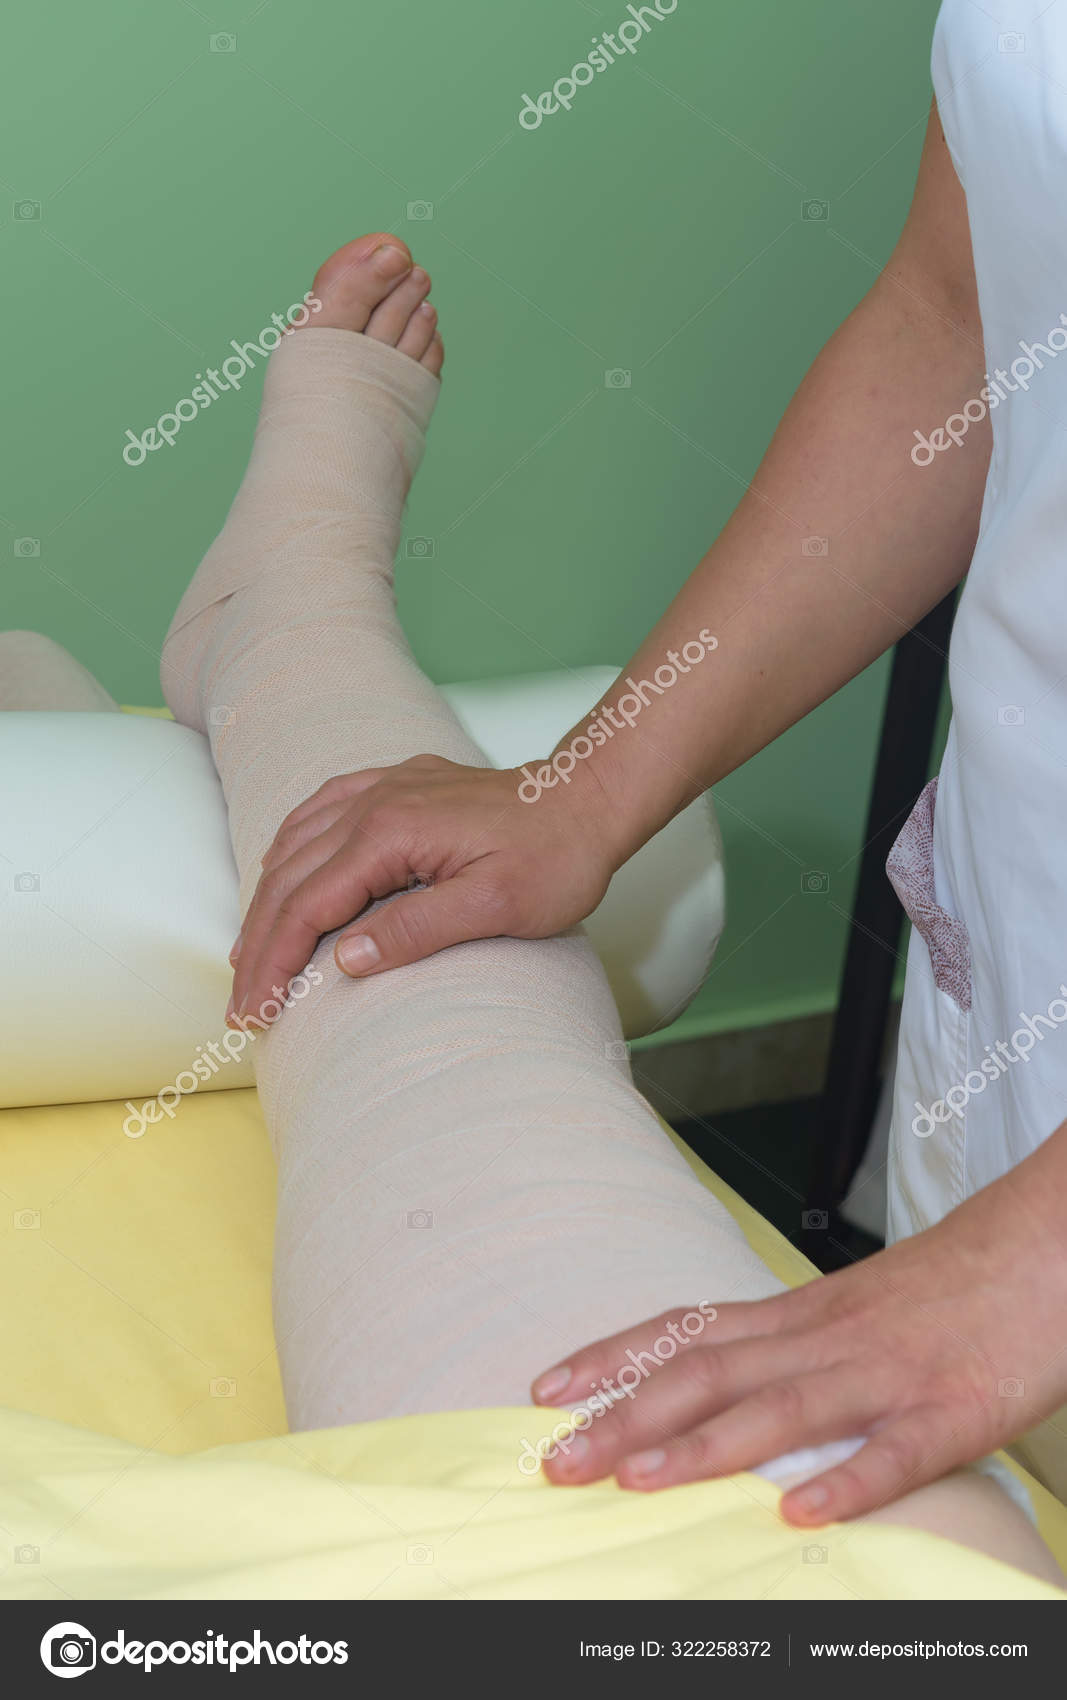 Managing Lymphedema With Complete Decongestive Therapy